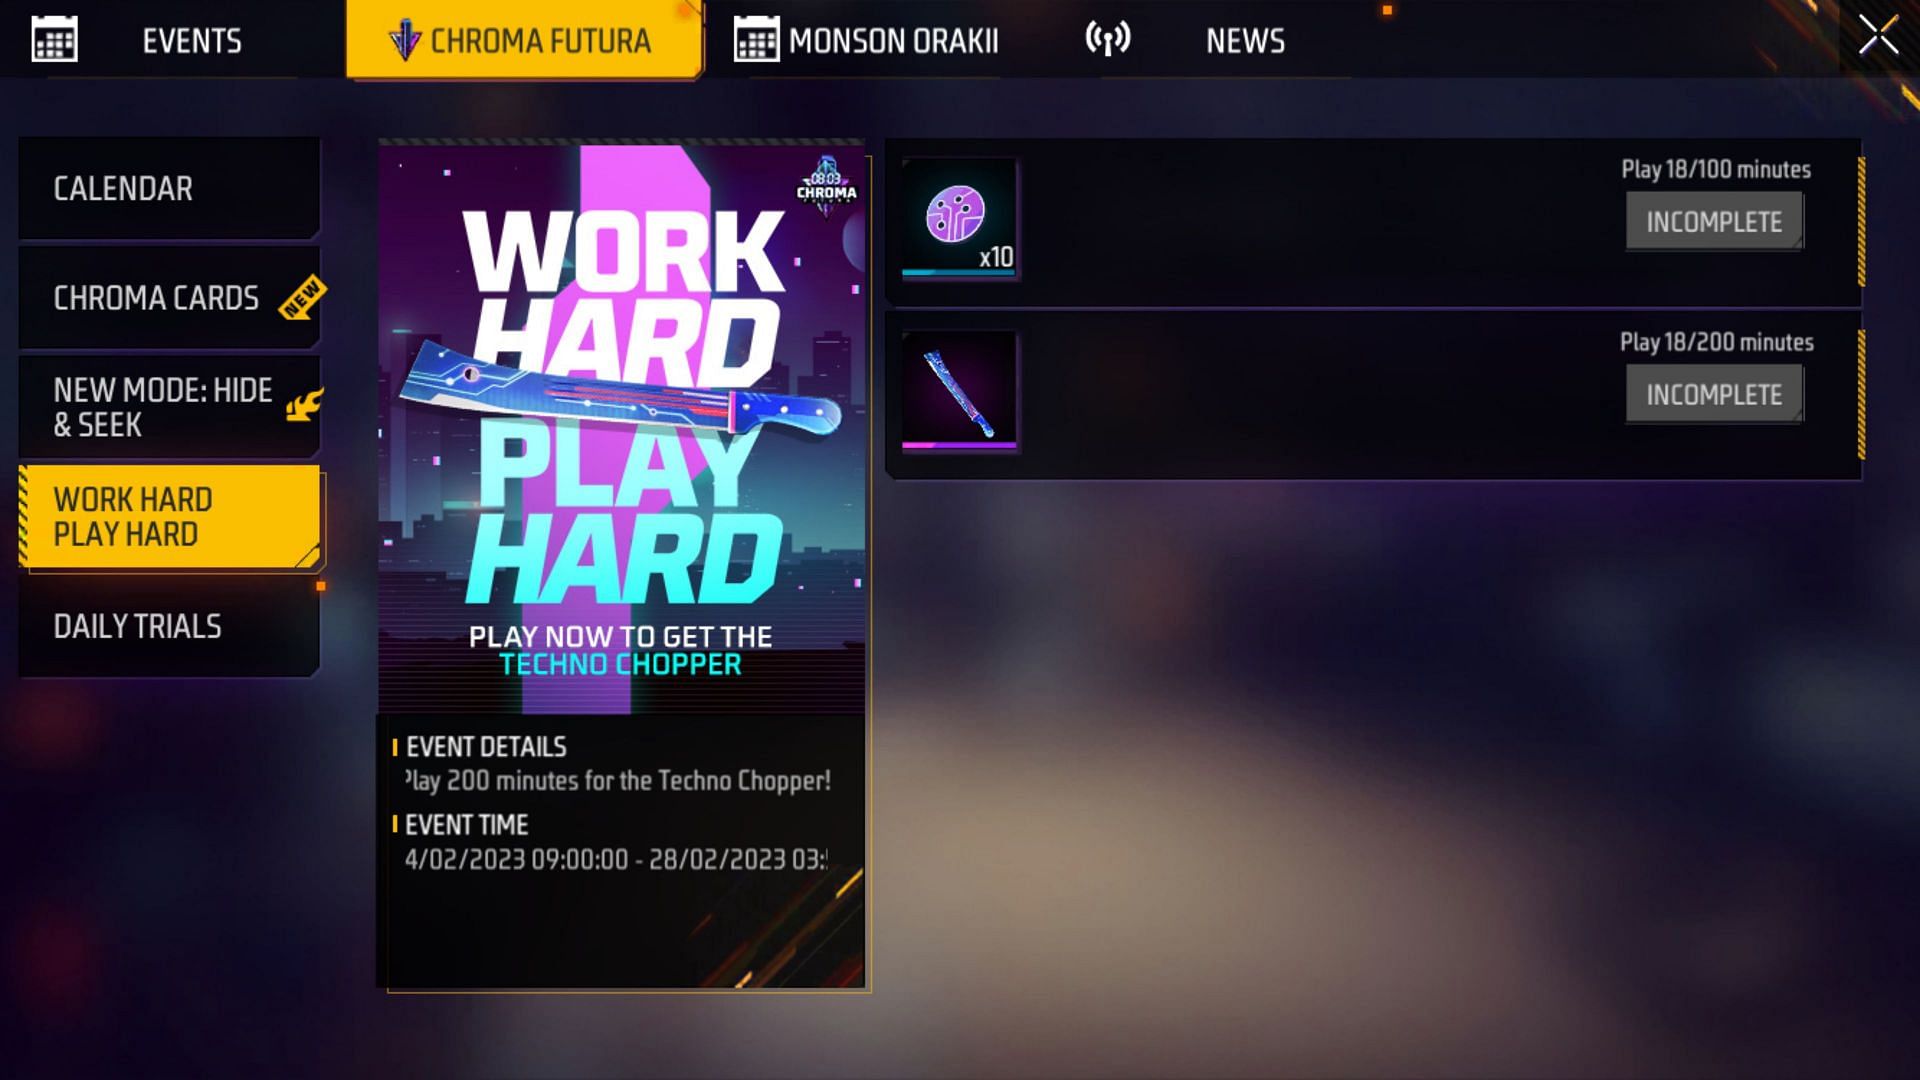 Work Hard event is available in the game (Image via Garena)